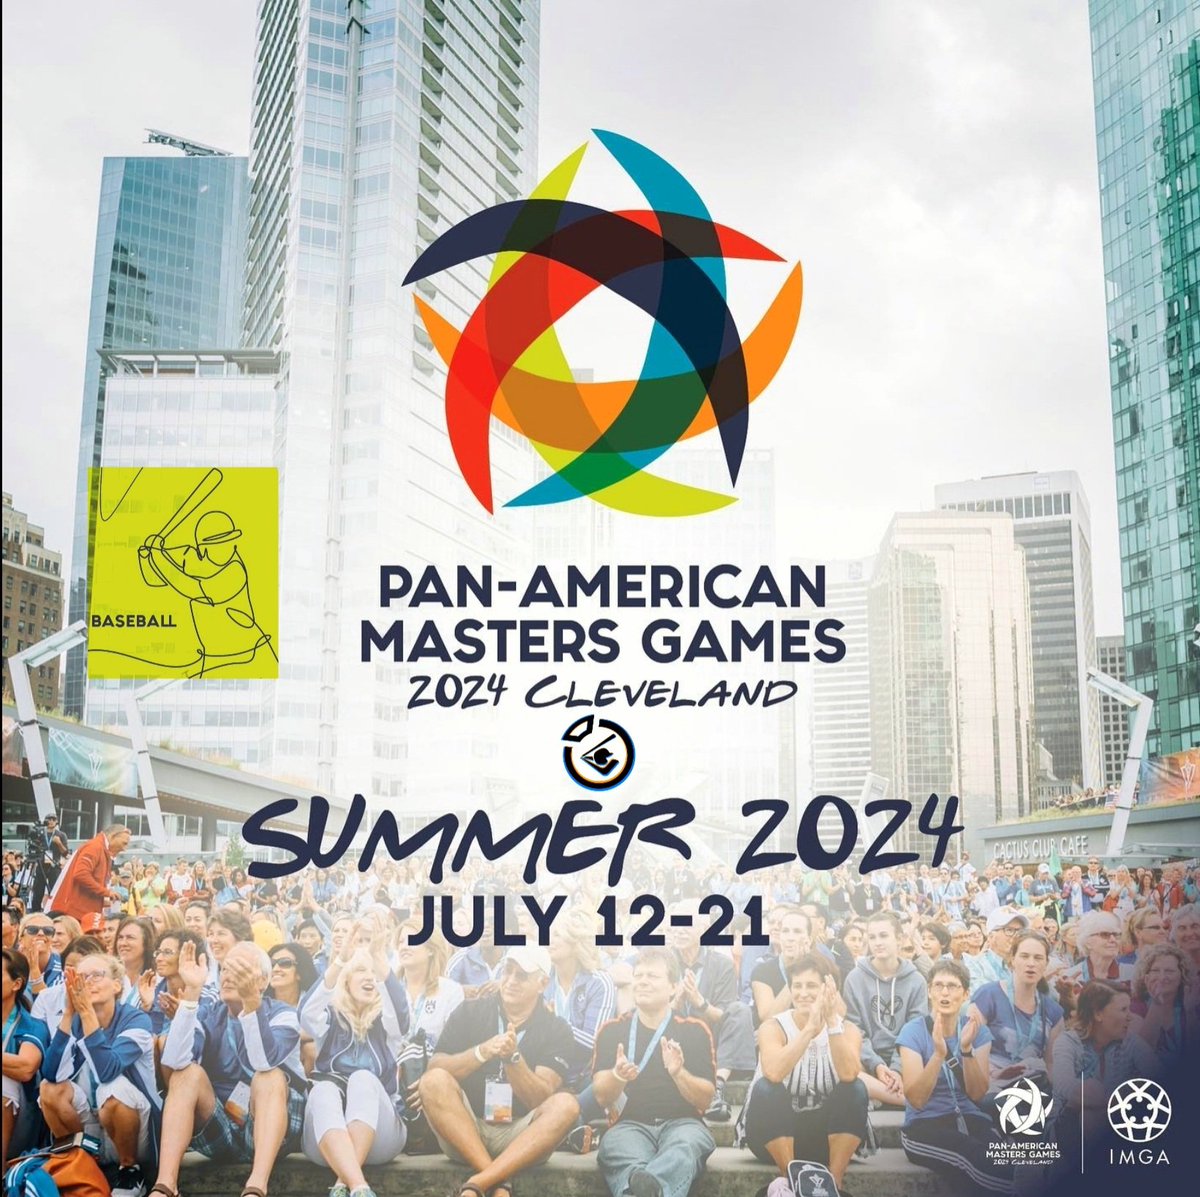 Honored I was asked & stoked to be part of this! 
@CLEmasters2024 Pan-American Masters Games: 
For the first time ever, the Olympic-like sports festival for Masters Athletes comes to the United States in #Cleveland, #Ohio. 💪🏼⚾️🇺🇲🥇
#Baseball  #CLEMasters2024 | #ThisIsCle | #PanAm